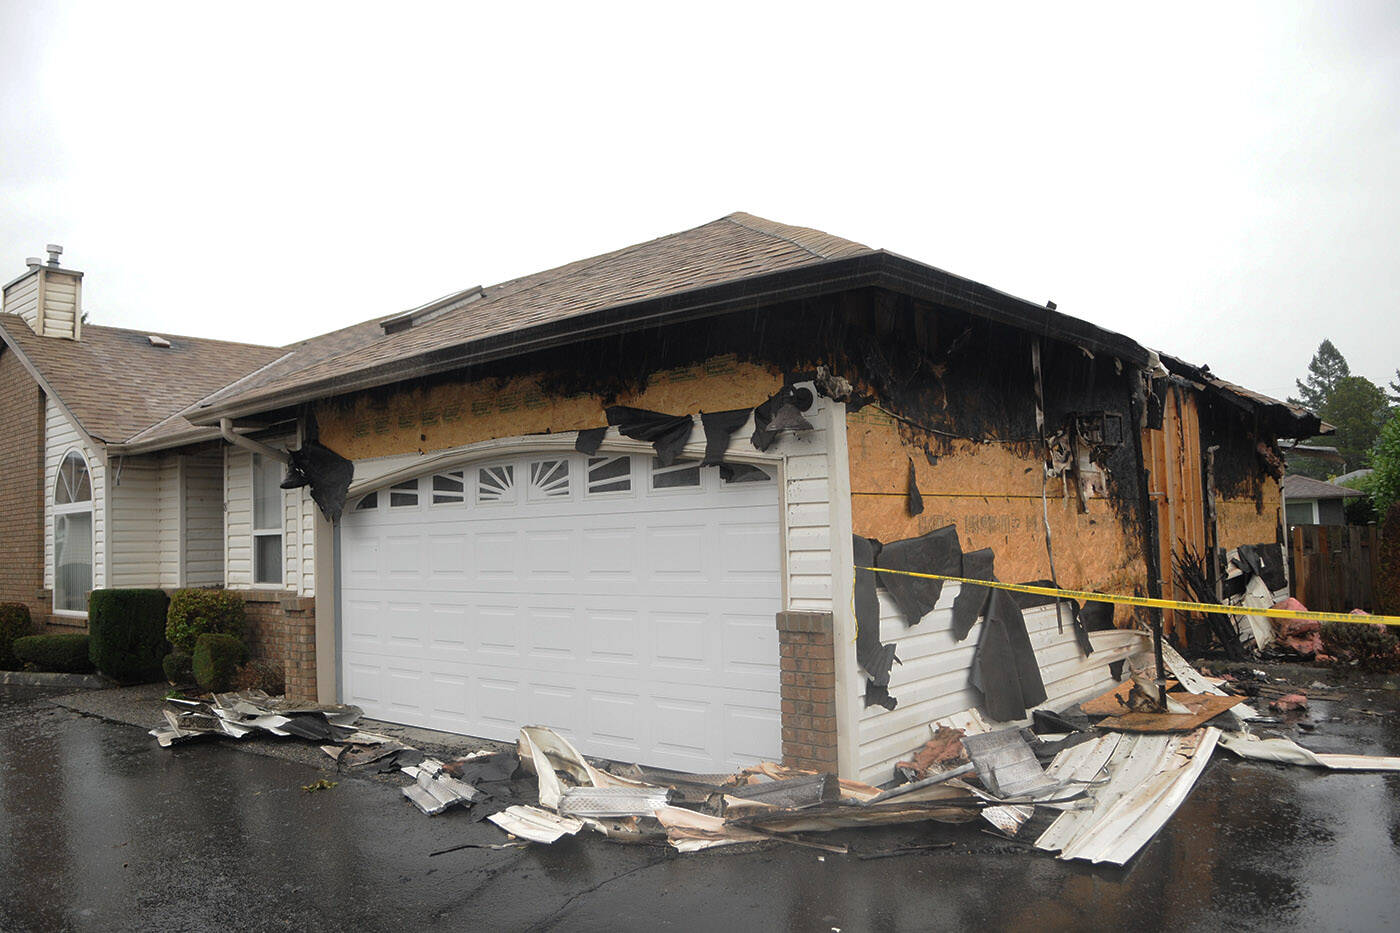 The aftermath of a fire at a townhouse complex on Portage Avenue. The fire happened around 6:15 a.m. on Nov. 11, 2021. (Jenna Hauck/ Chilliwack Progress)